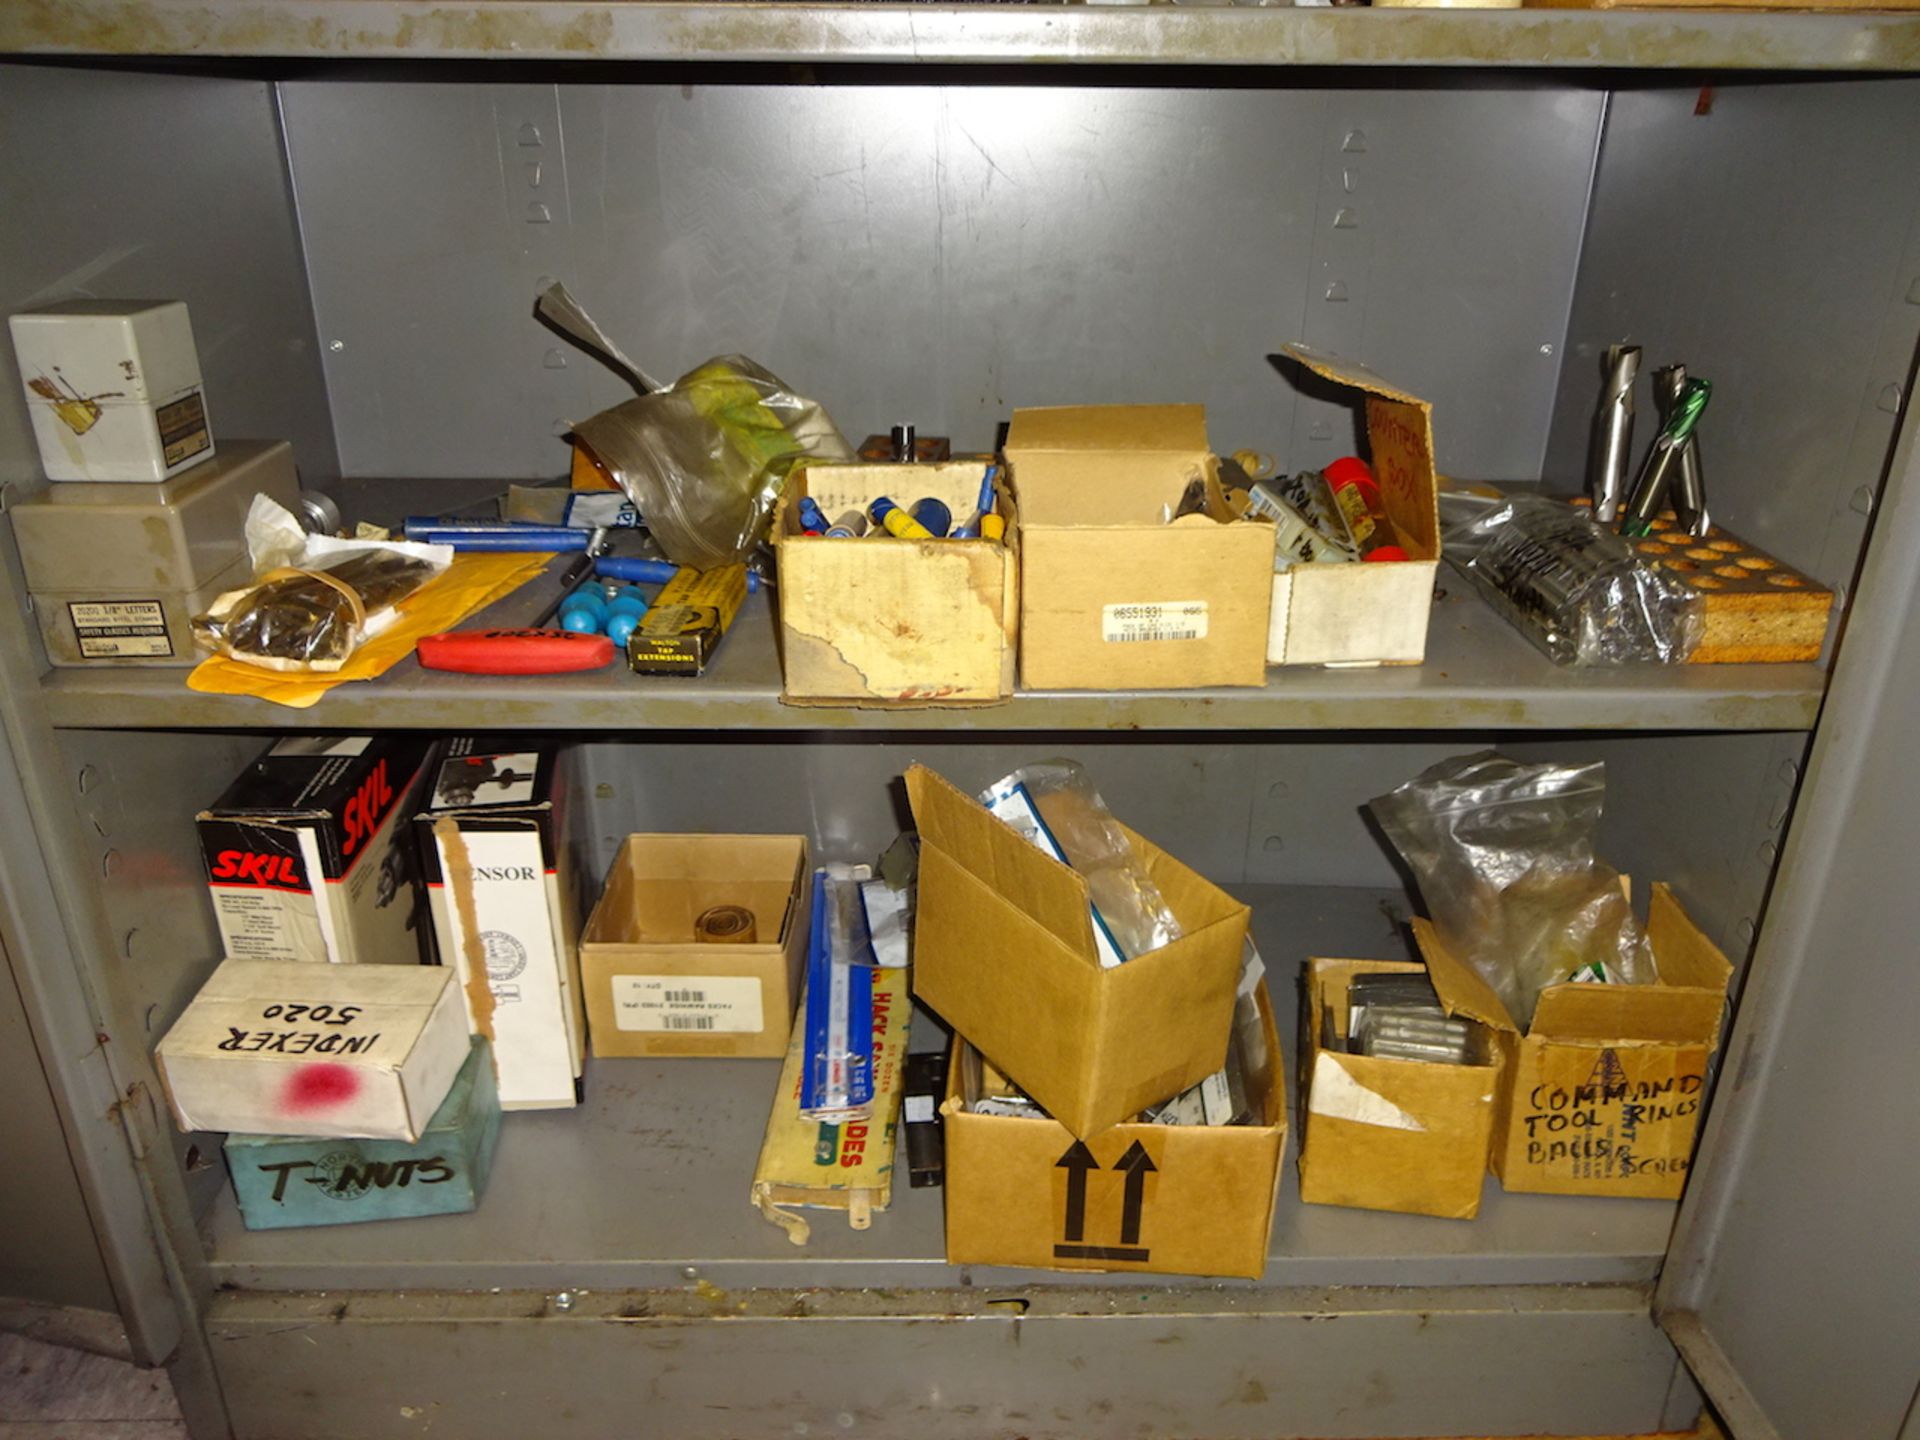 LOT: Assorted Milling Cutters, Reamers, Drills, Set Screws, etc. - Image 4 of 4